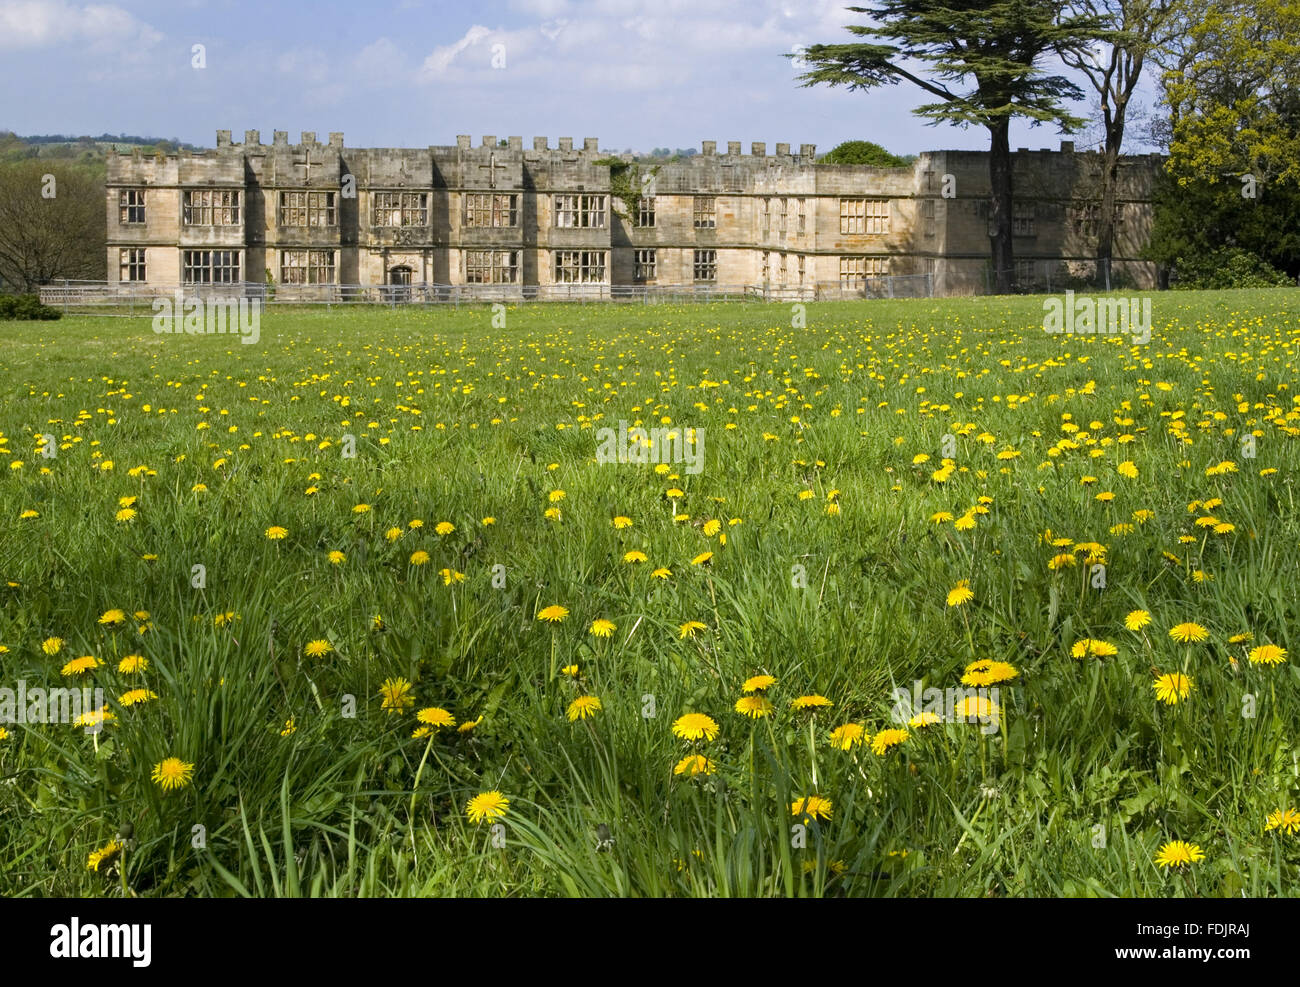 View across a wildflower meadow towards the Hall built between 1603 and 1620, with alterations in both the 18th and 19th centuries, at Gibside, Newcastle upon Tyne. George Bowes inherited the estate in 1722 and landscaped the grounds around Gibside Hall. Stock Photo